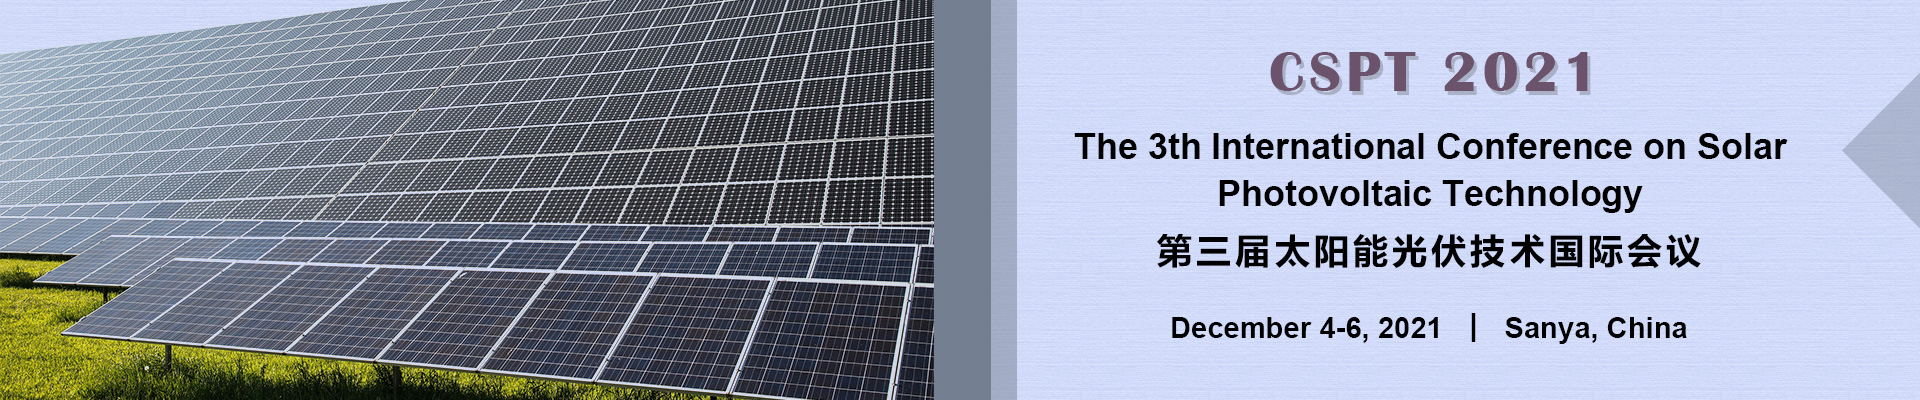 The 3th Int'l Conference on Solar Photovoltaic Technology (CSPT 2021), Sanya, Hainan, China